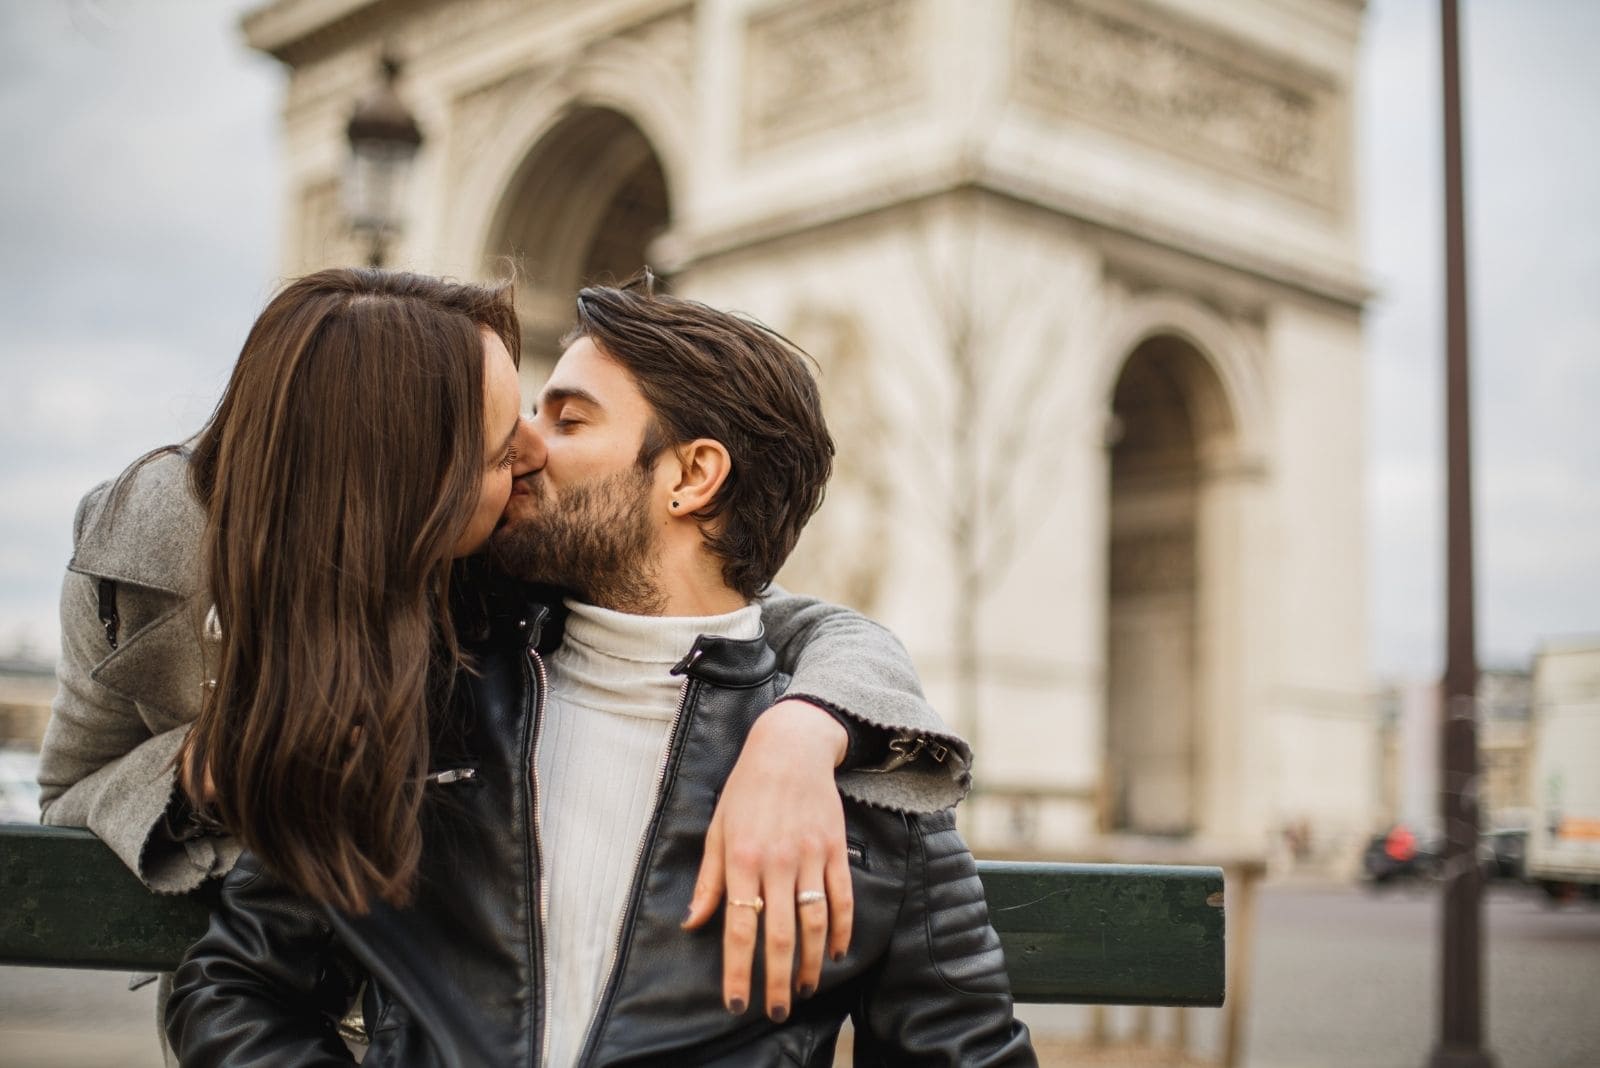 Parisian man and woman are french kissing near the triumphal arch with the man sitting on the bench